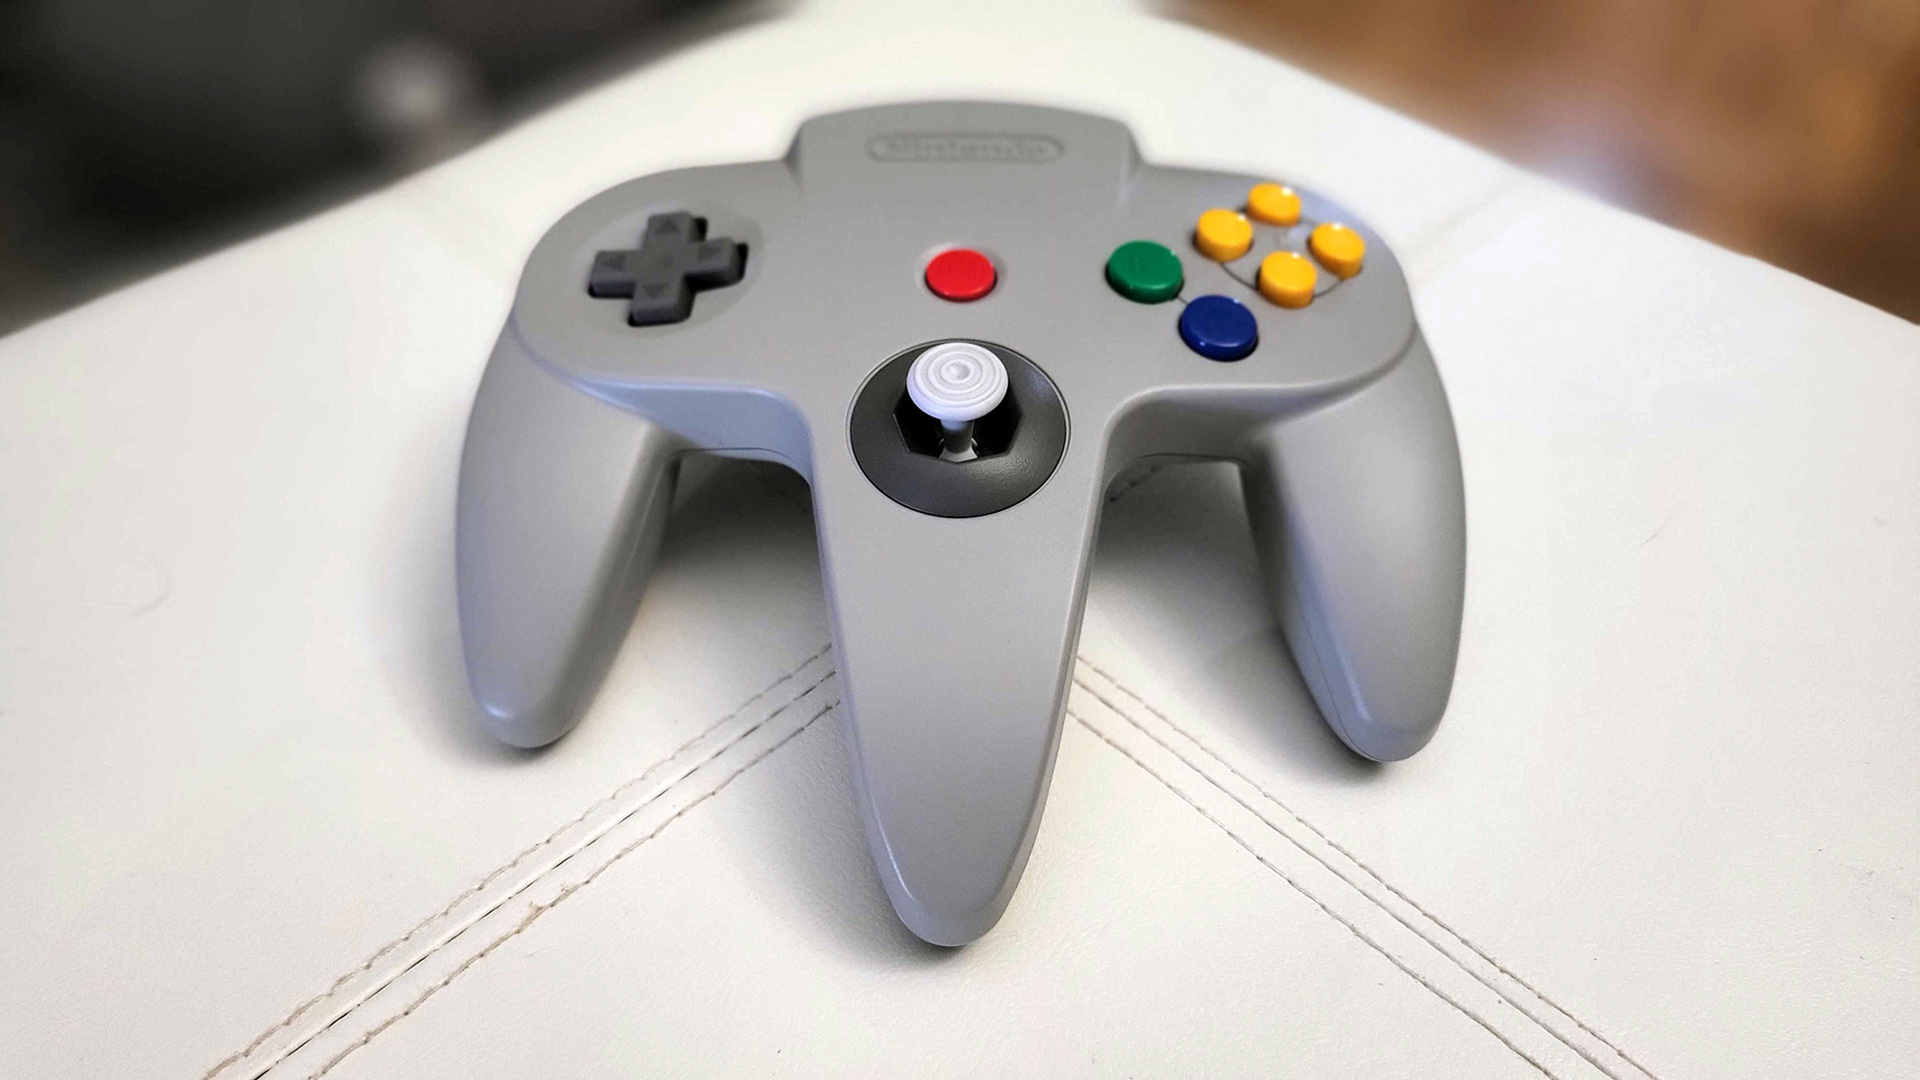 The Switch N64 controller is great, shame the Expansion Pack isn't